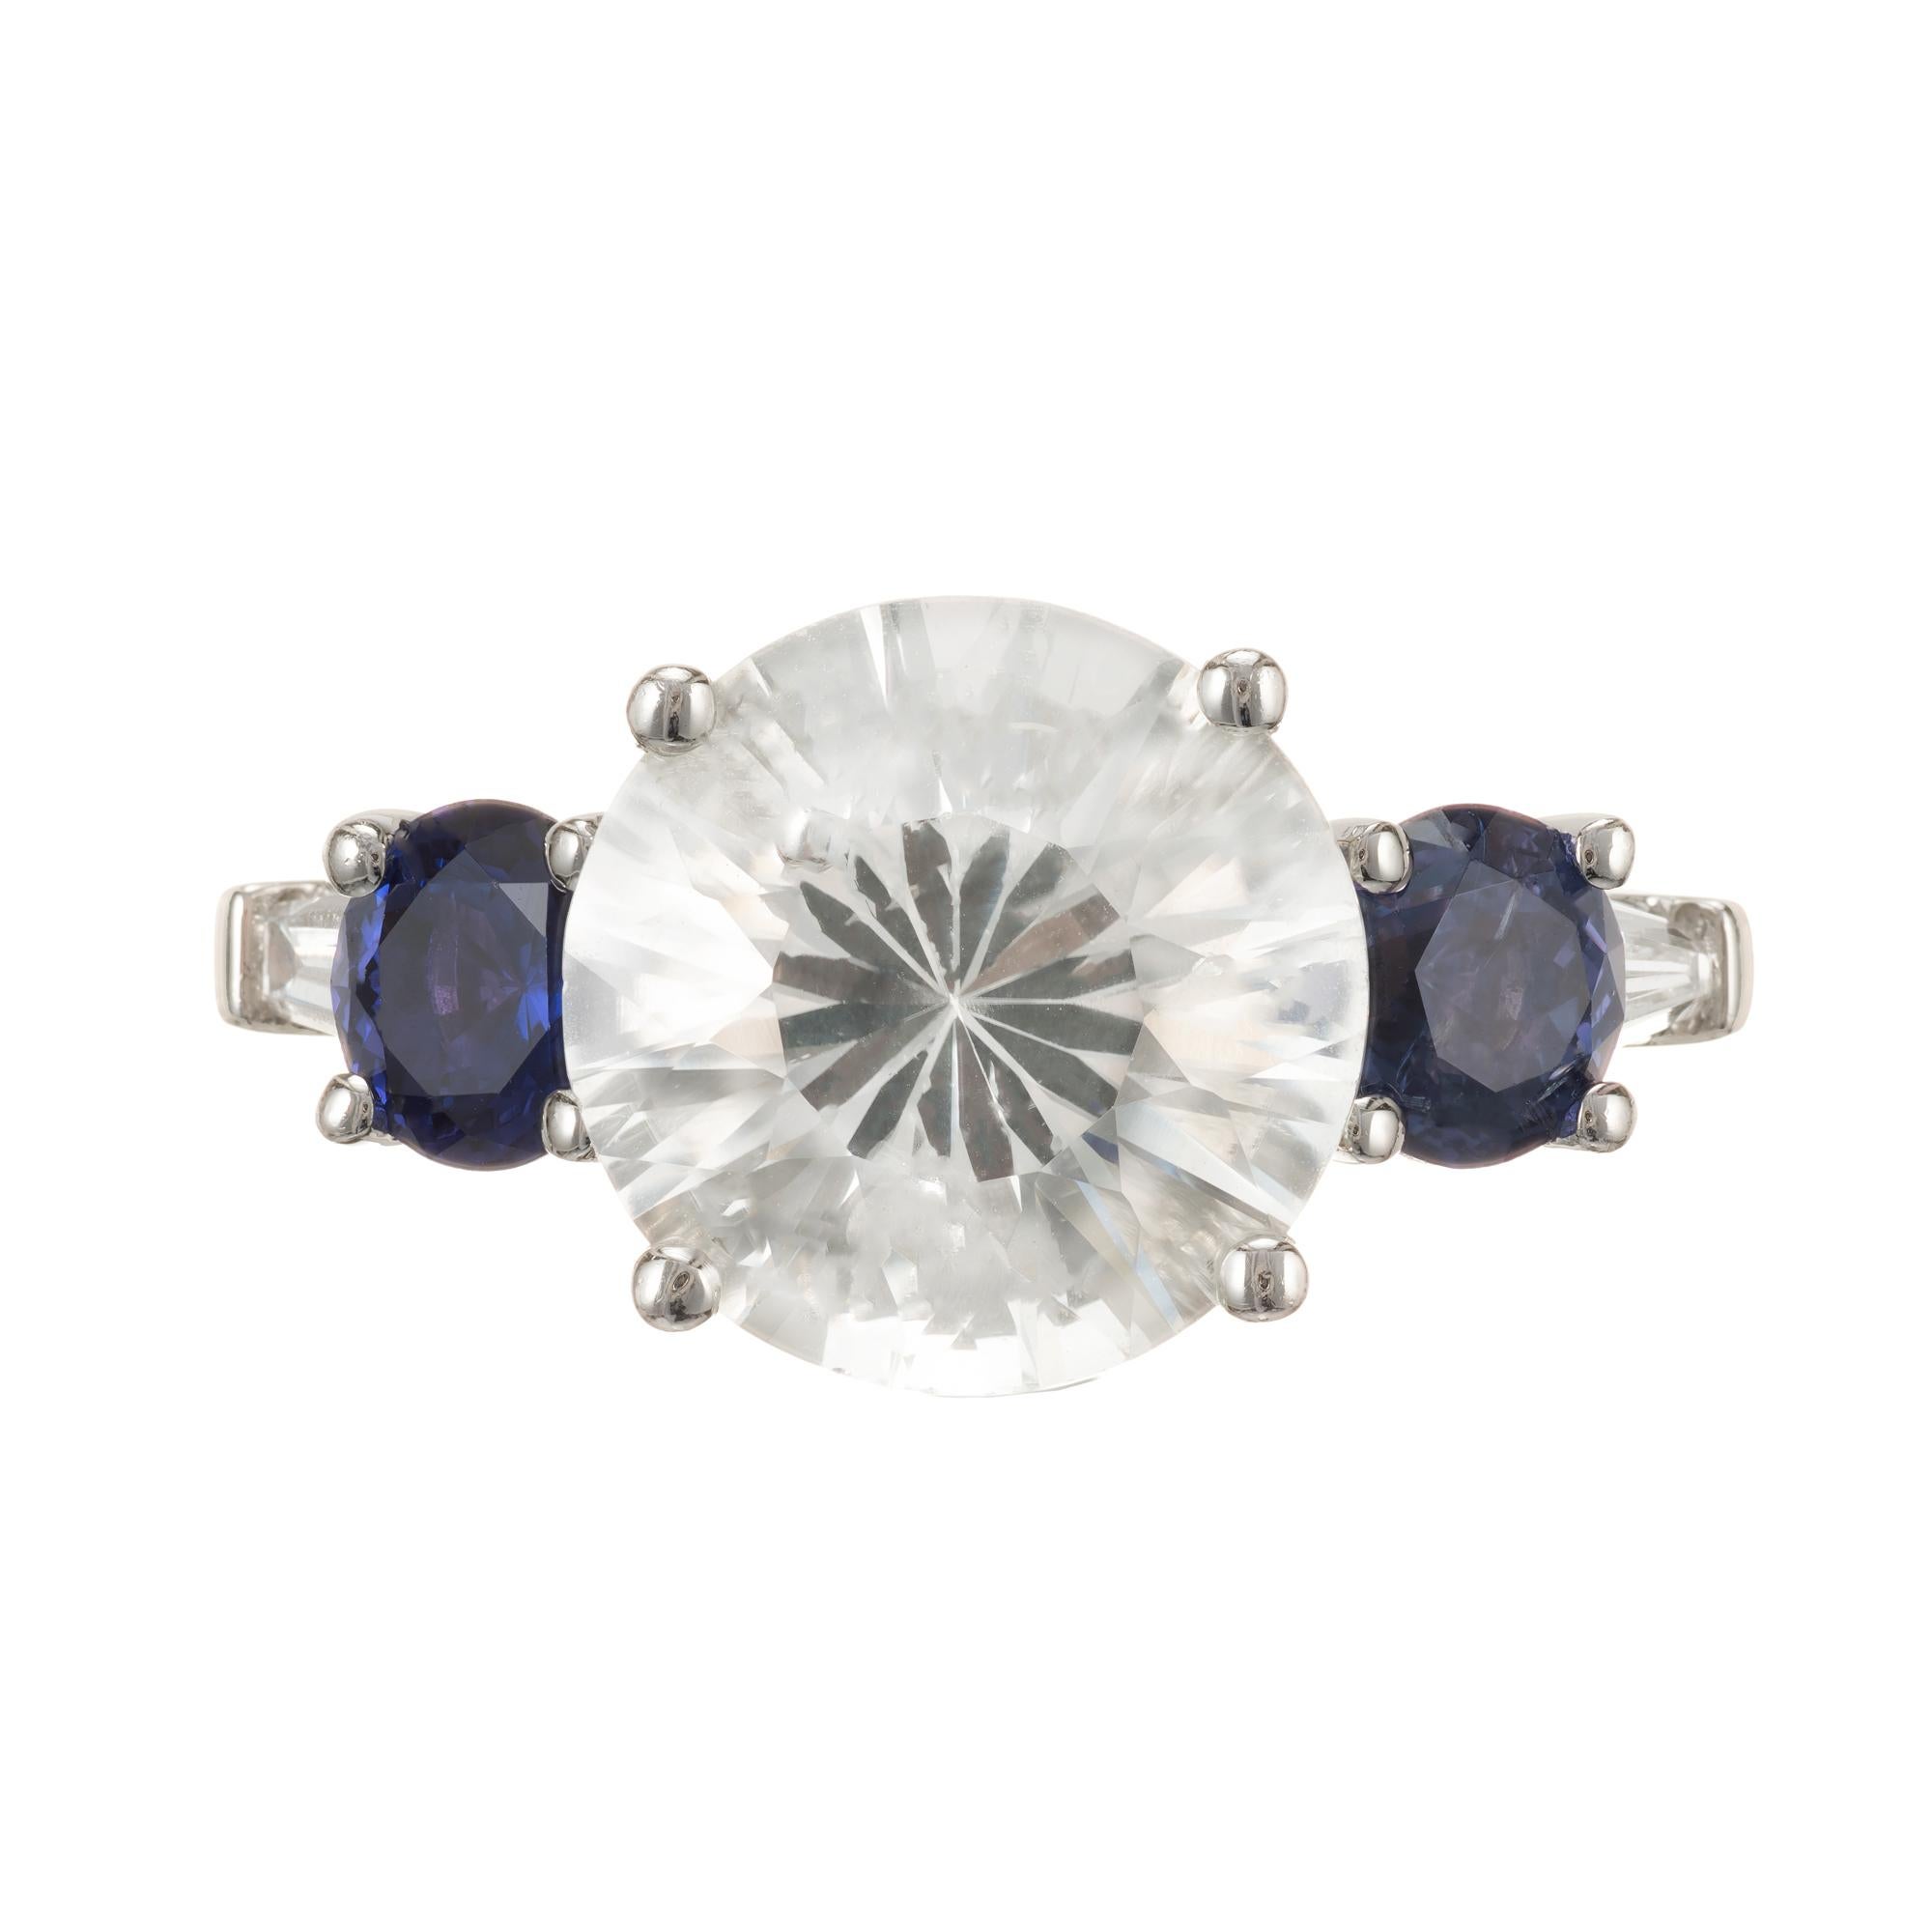 Round sapphire and diamond engagement ring. White Natural corundum natural Sapphire, no heat or enhancements Sapphire. The cut is old European brilliant with a raised crown and small table. On the either side of the center are two AGL certified old